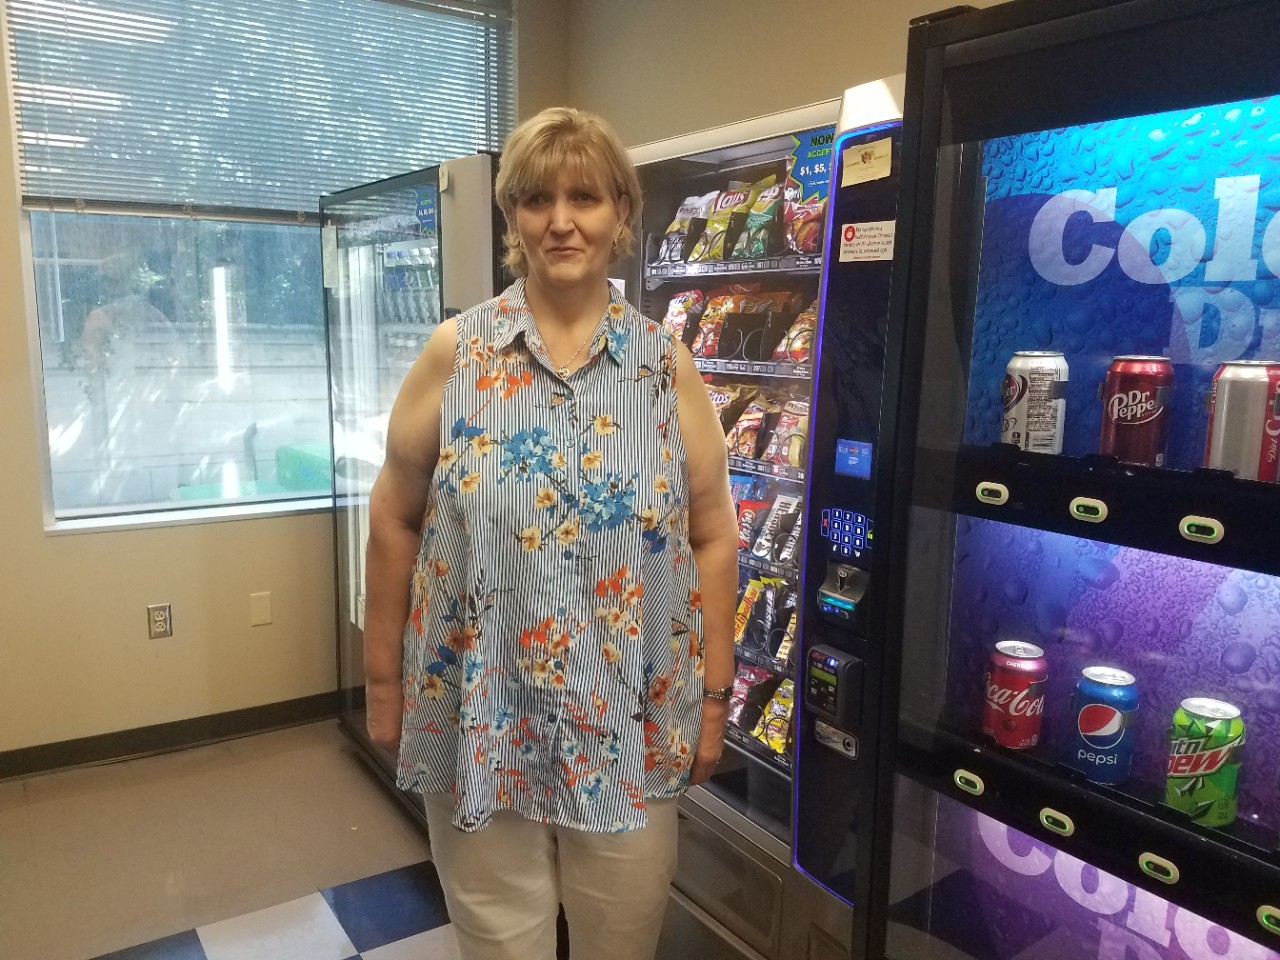 a blonde woman in a flowery sleeveless shirt stands in the break room and cafeteria of the state office building where she works, with vending machines behind her